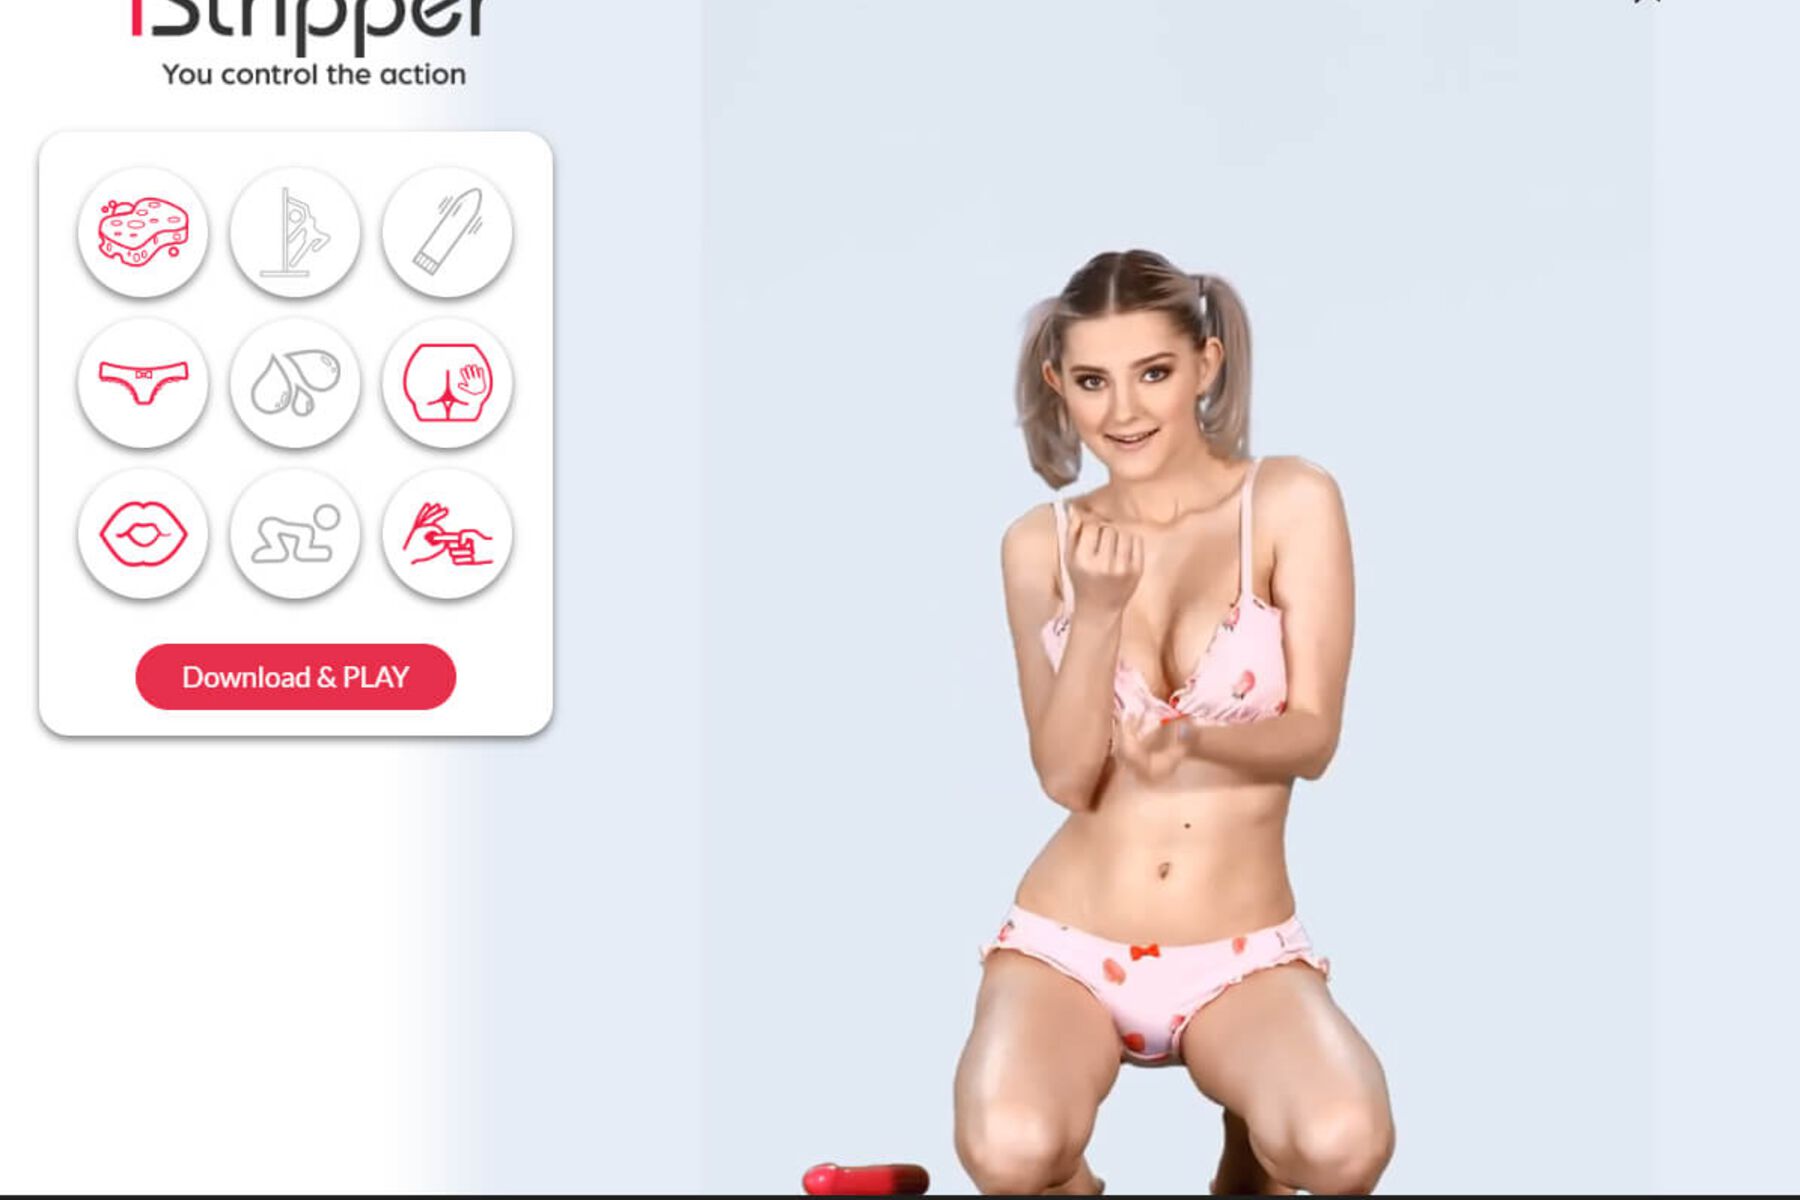 iStripper screenshot showing girl in her underwear and controls